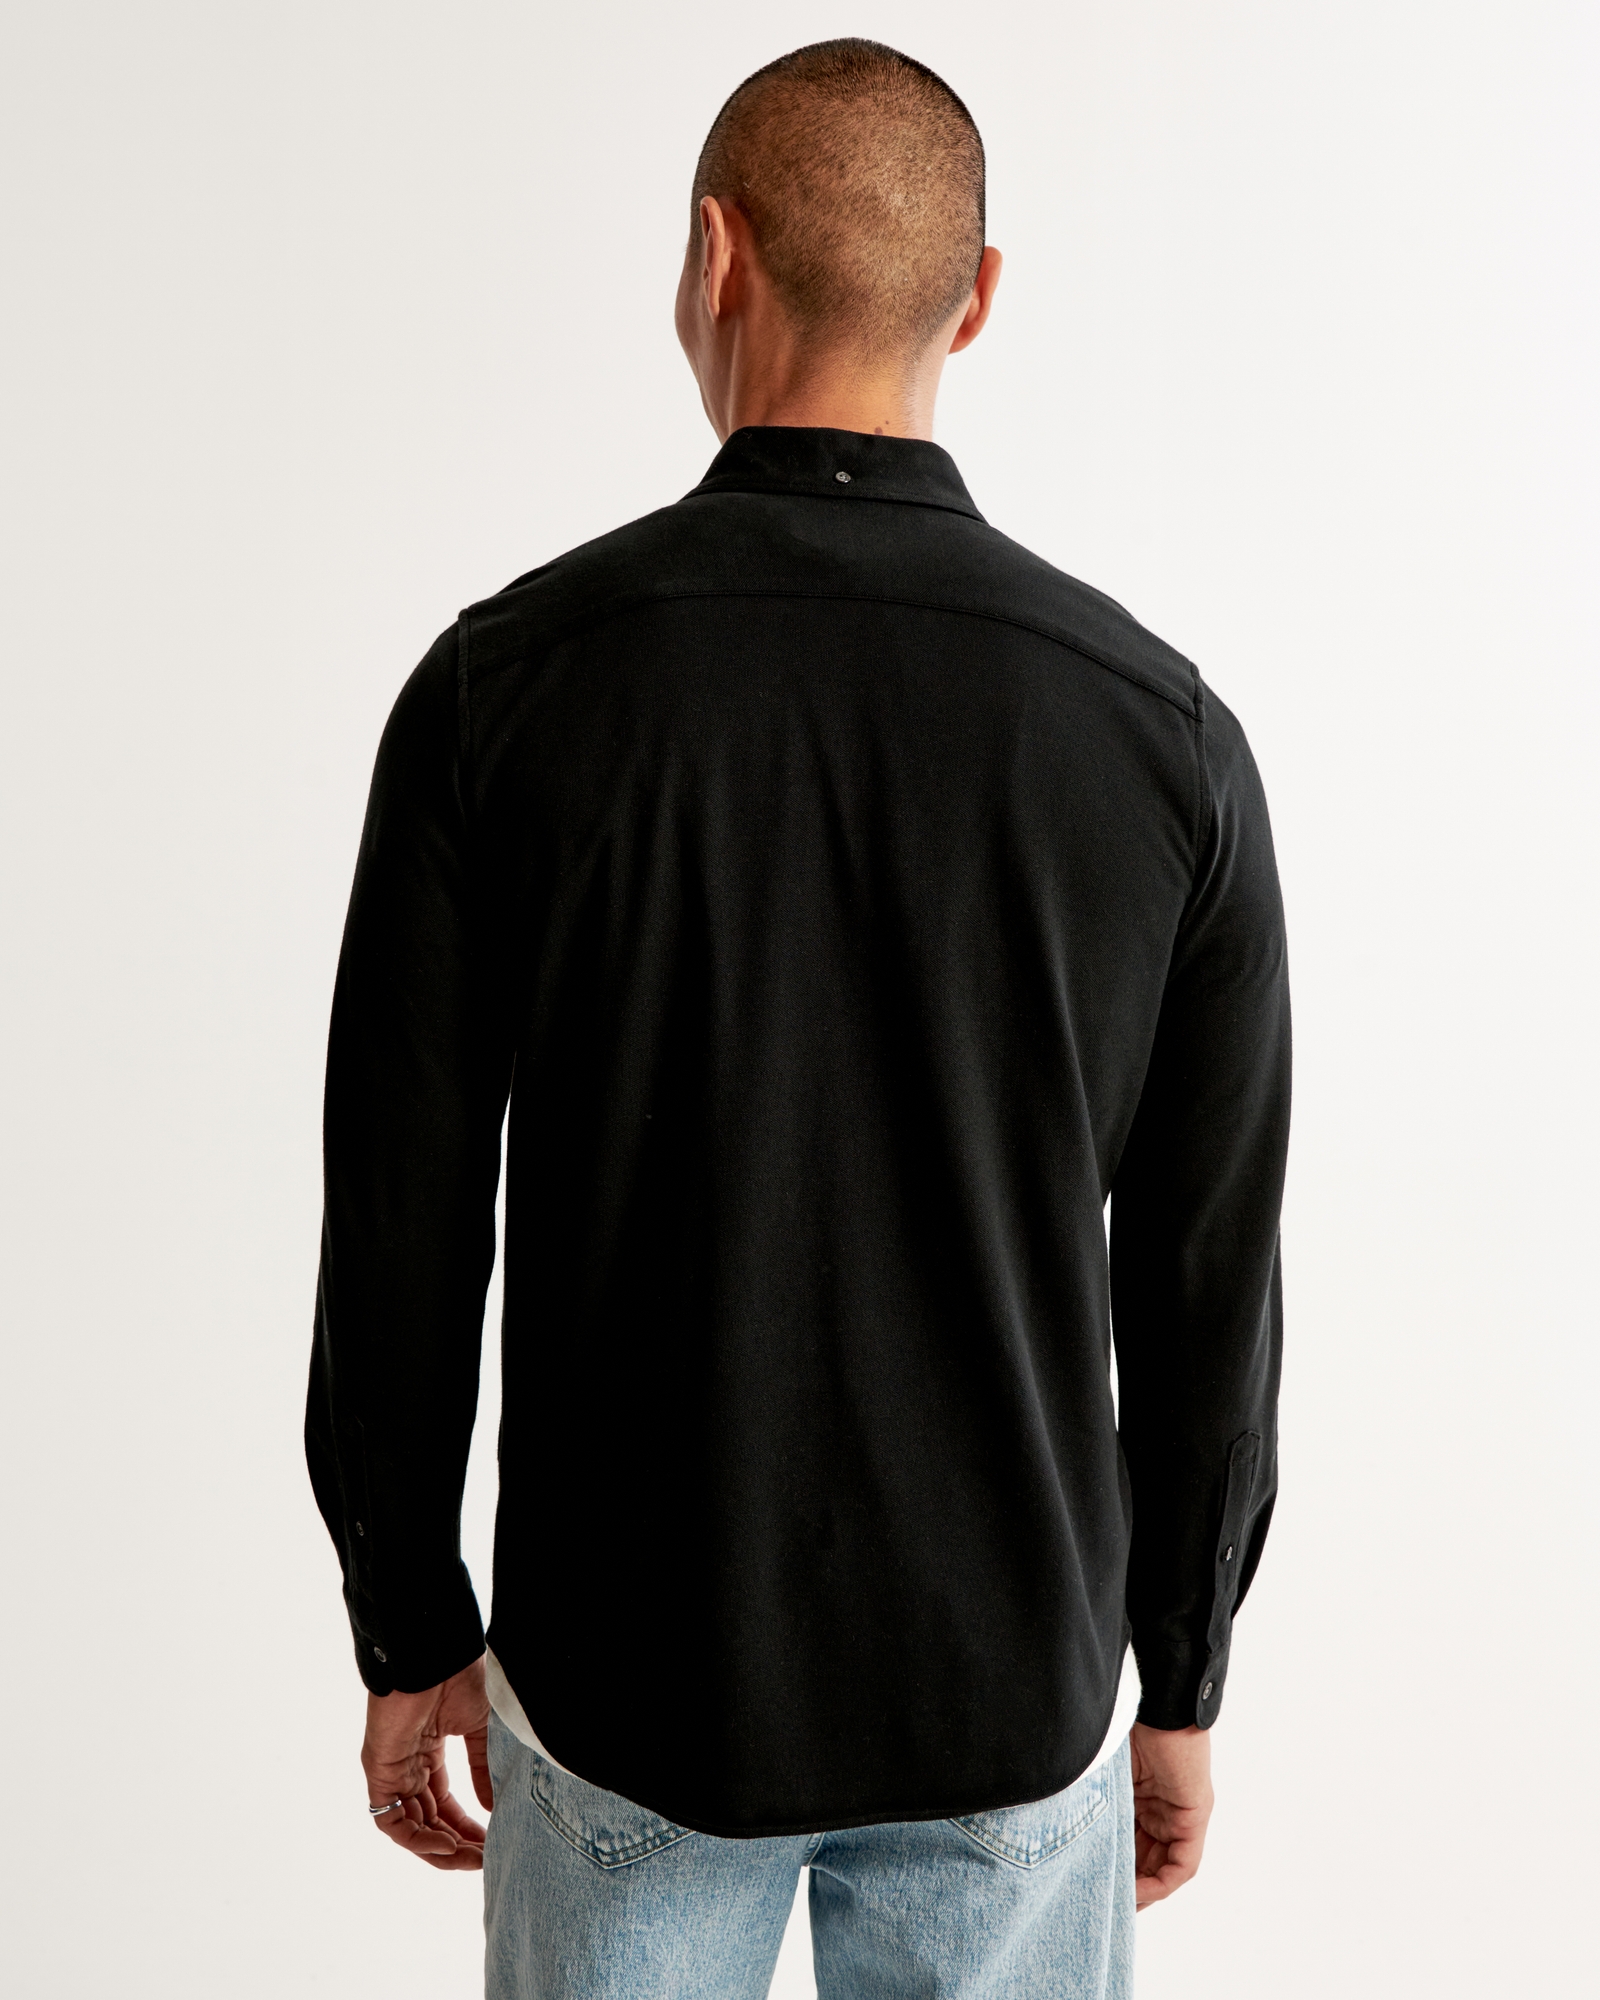 Men's Long-Sleeve Performance Button-Up Shirt in Black | Size M Tall | Abercrombie & Fitch